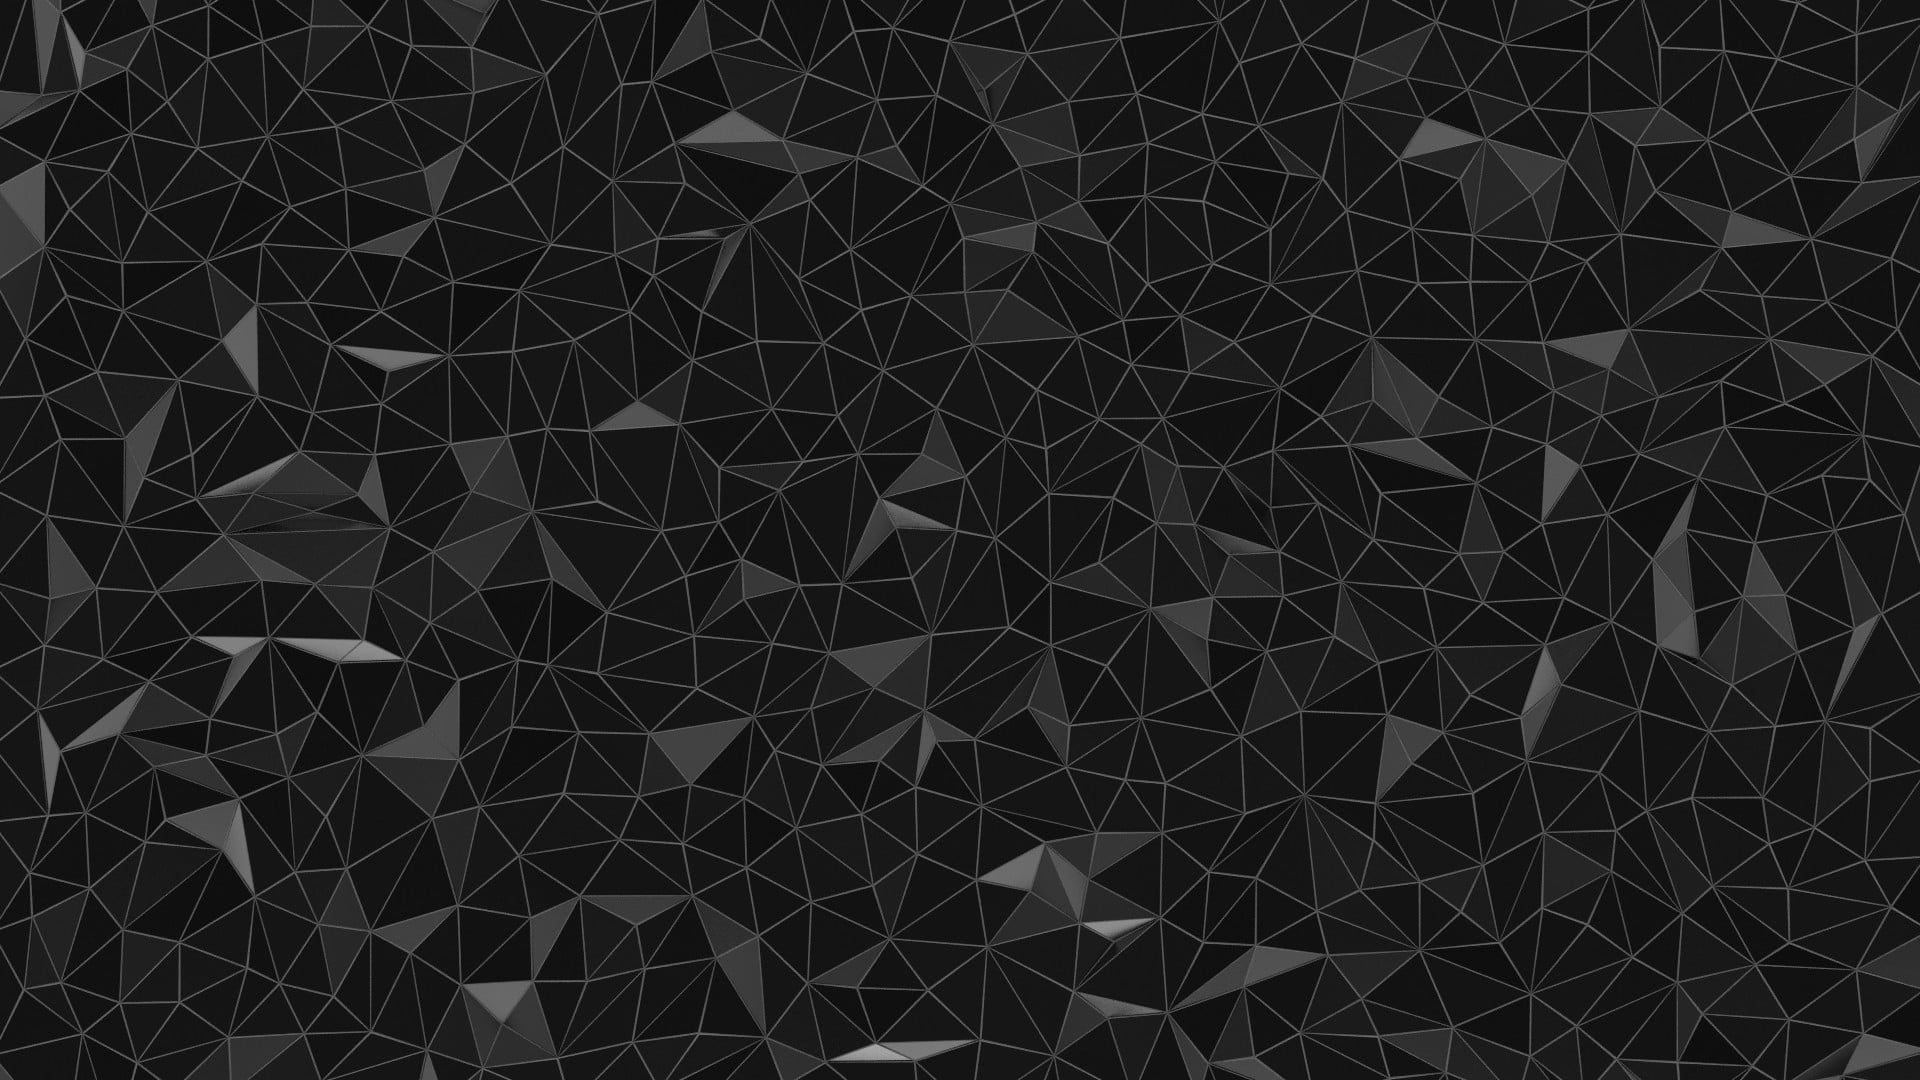 black and gray abstract digital wallpaper digital art low poly #geometry #minimalism #triangle #lines black. Grey abstract, Digital wallpaper, 1920x1080 wallpaper